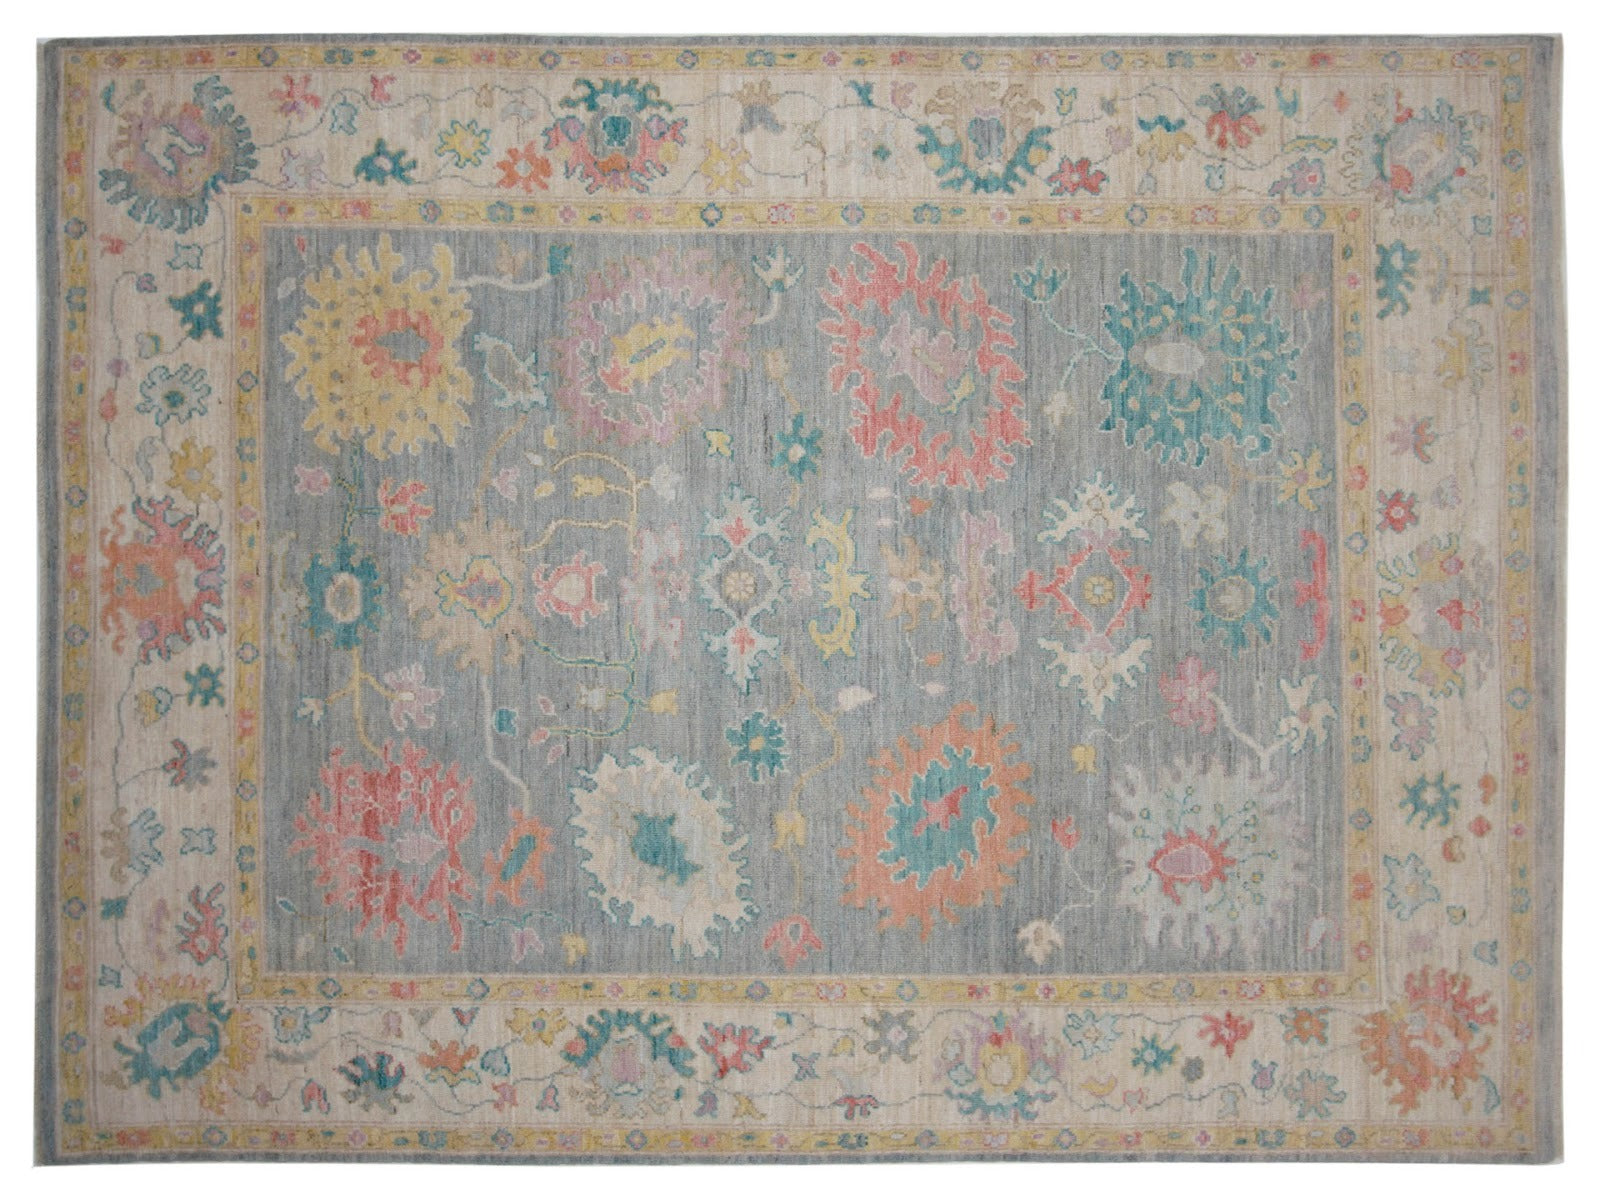 8x10 Turkish rug in transitional design featuring a gray backdrop with orange, blue, and pink floral motifs, framed by an ivory border, hand-knotted in 100% wool